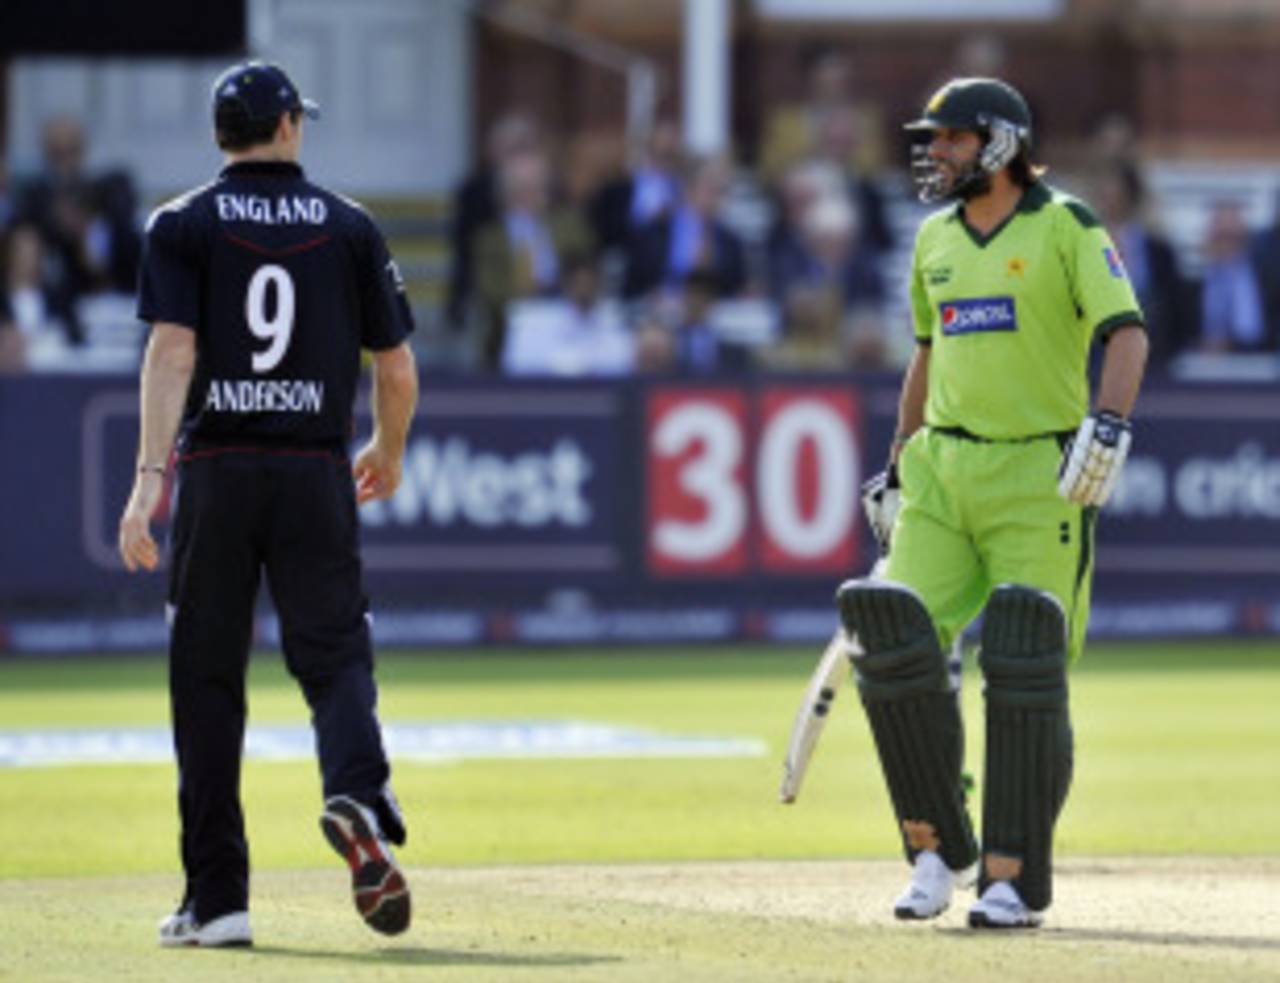 James Anderson and Shahid Afridi exchange words during Pakistan's innings, England v Pakistan, 4th ODI, Lord's, September 20, 2010